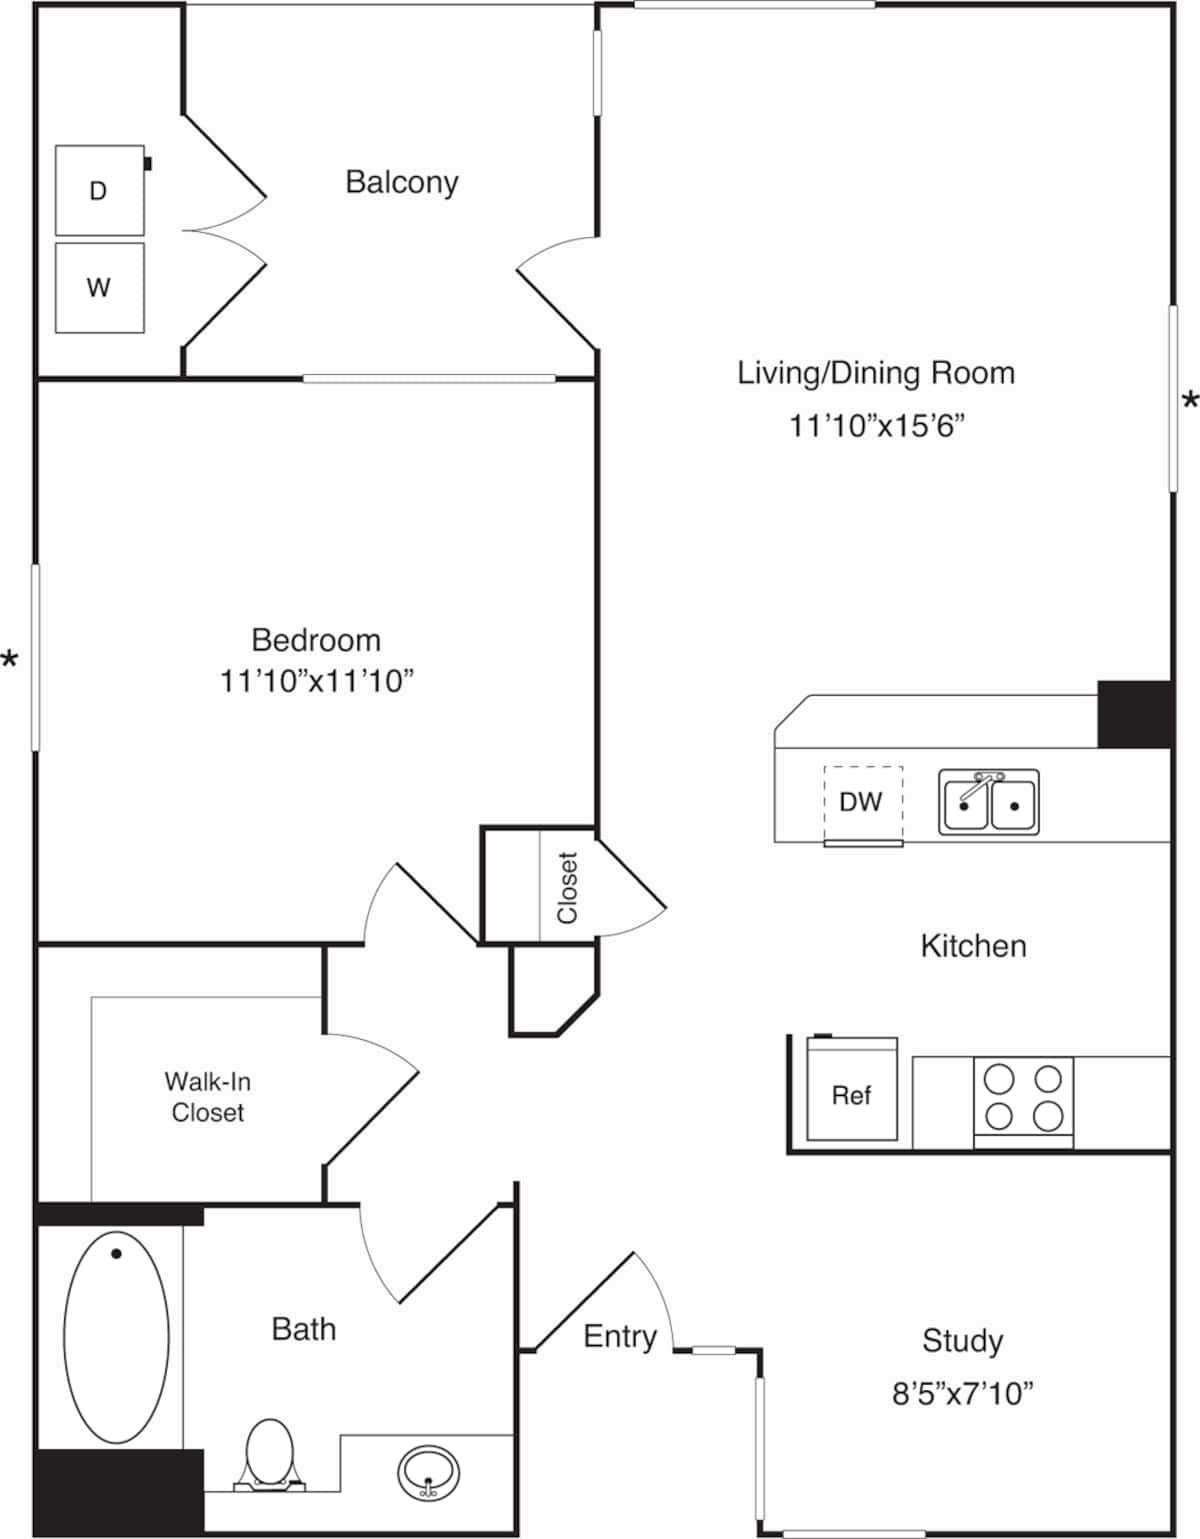 Floorplan diagram for B- The Crest with study, showing 1 bedroom